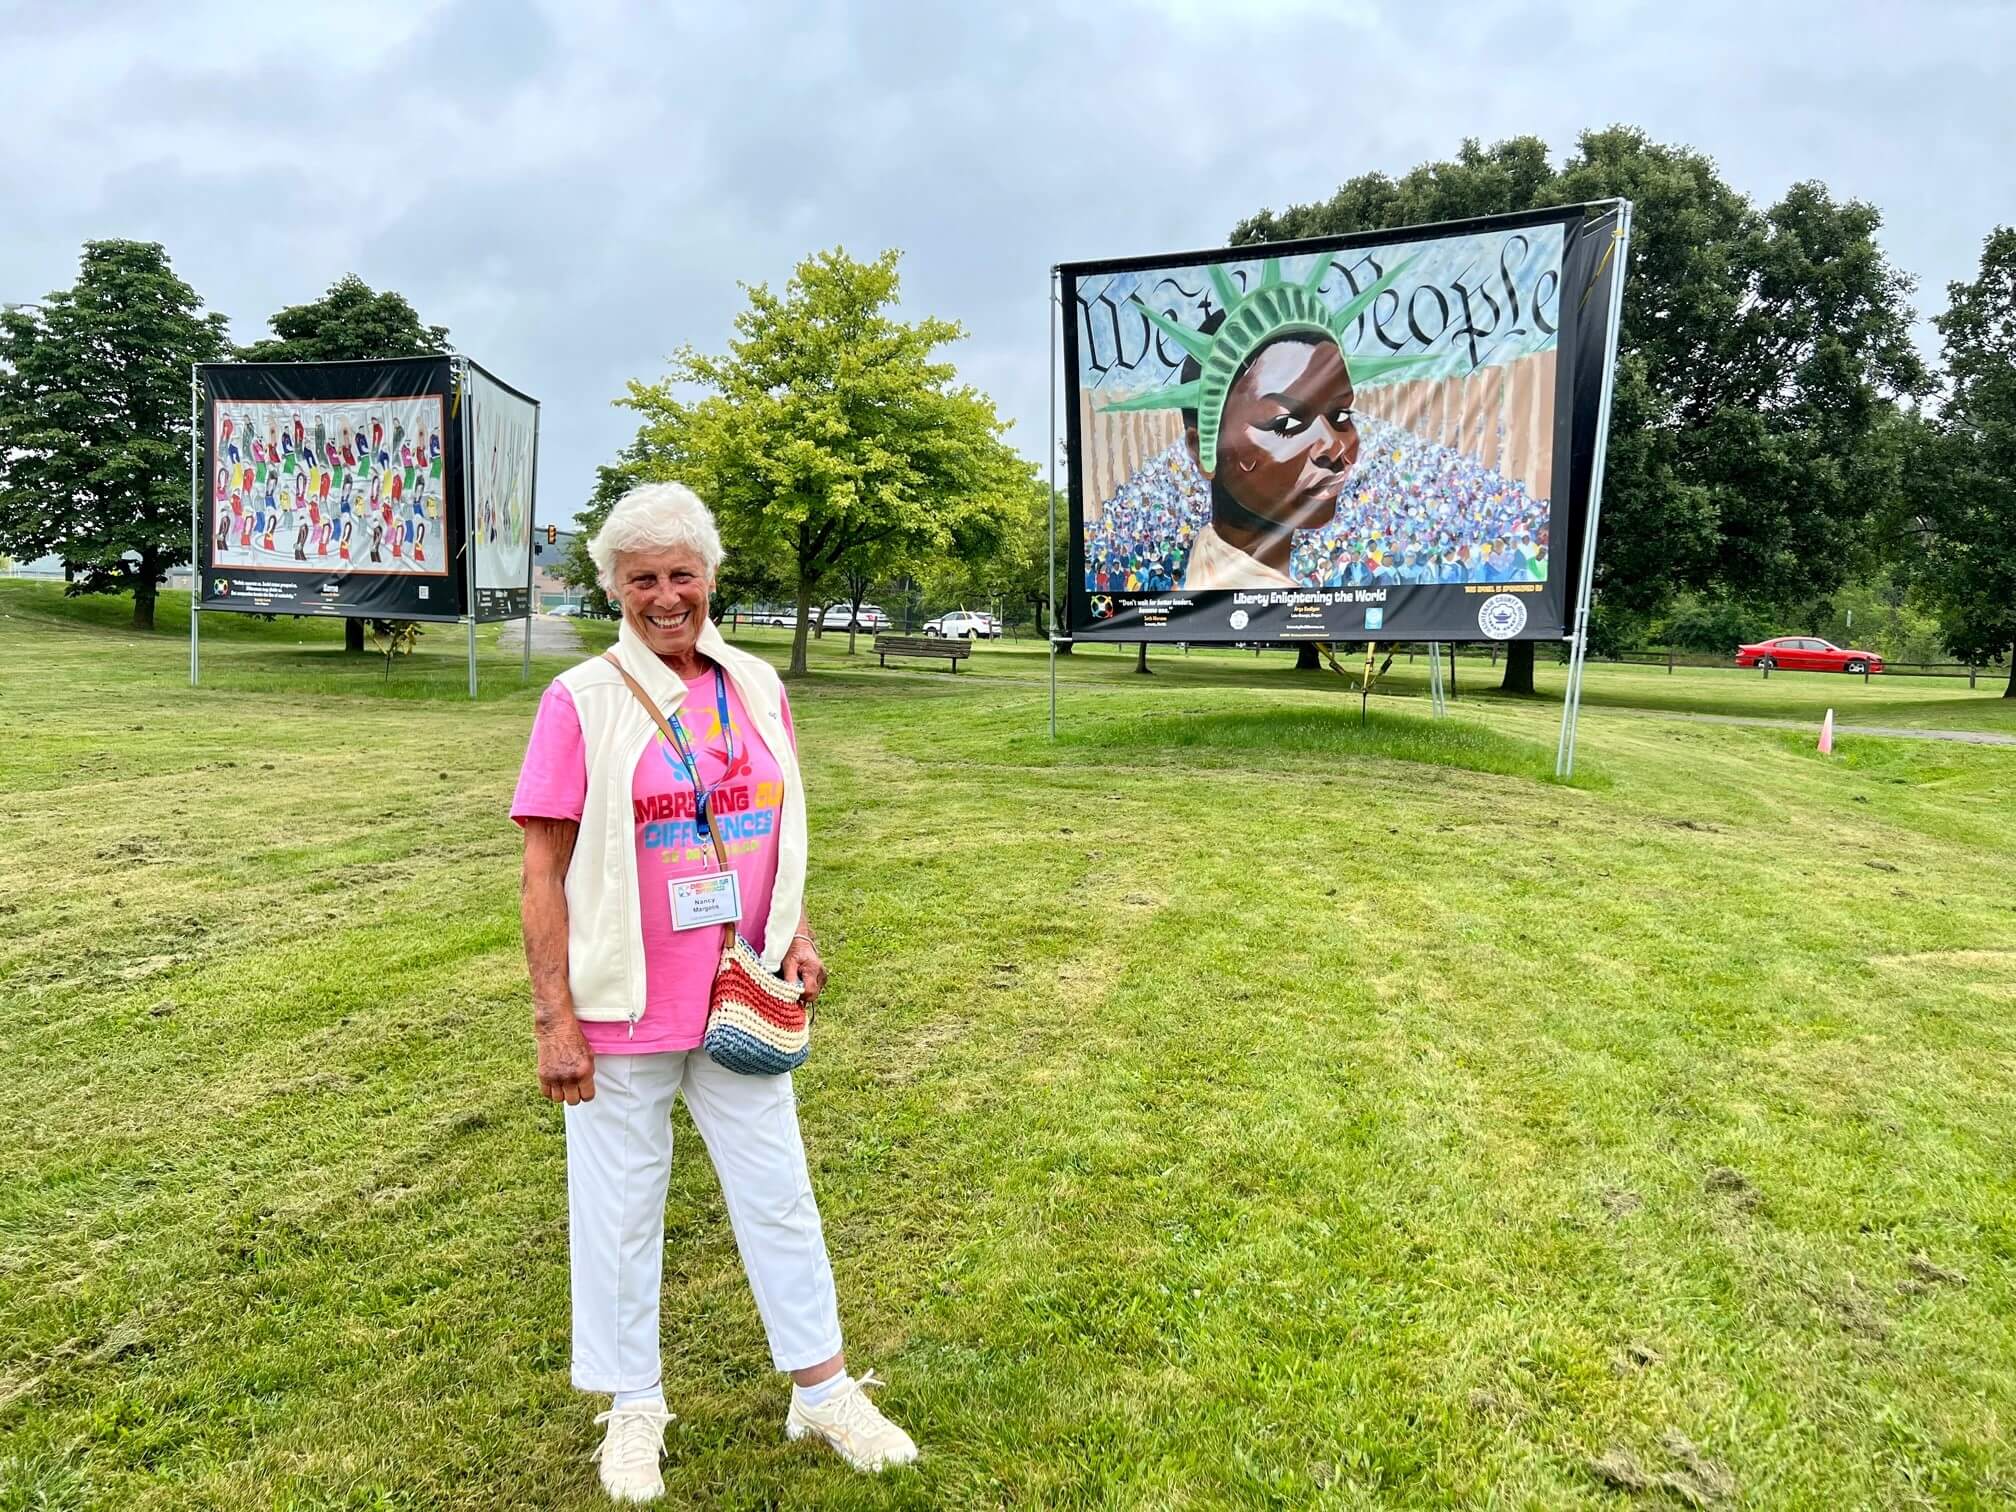 Nancy Margolis pictured at the Gallup Park installation with two signs of paintings behind her